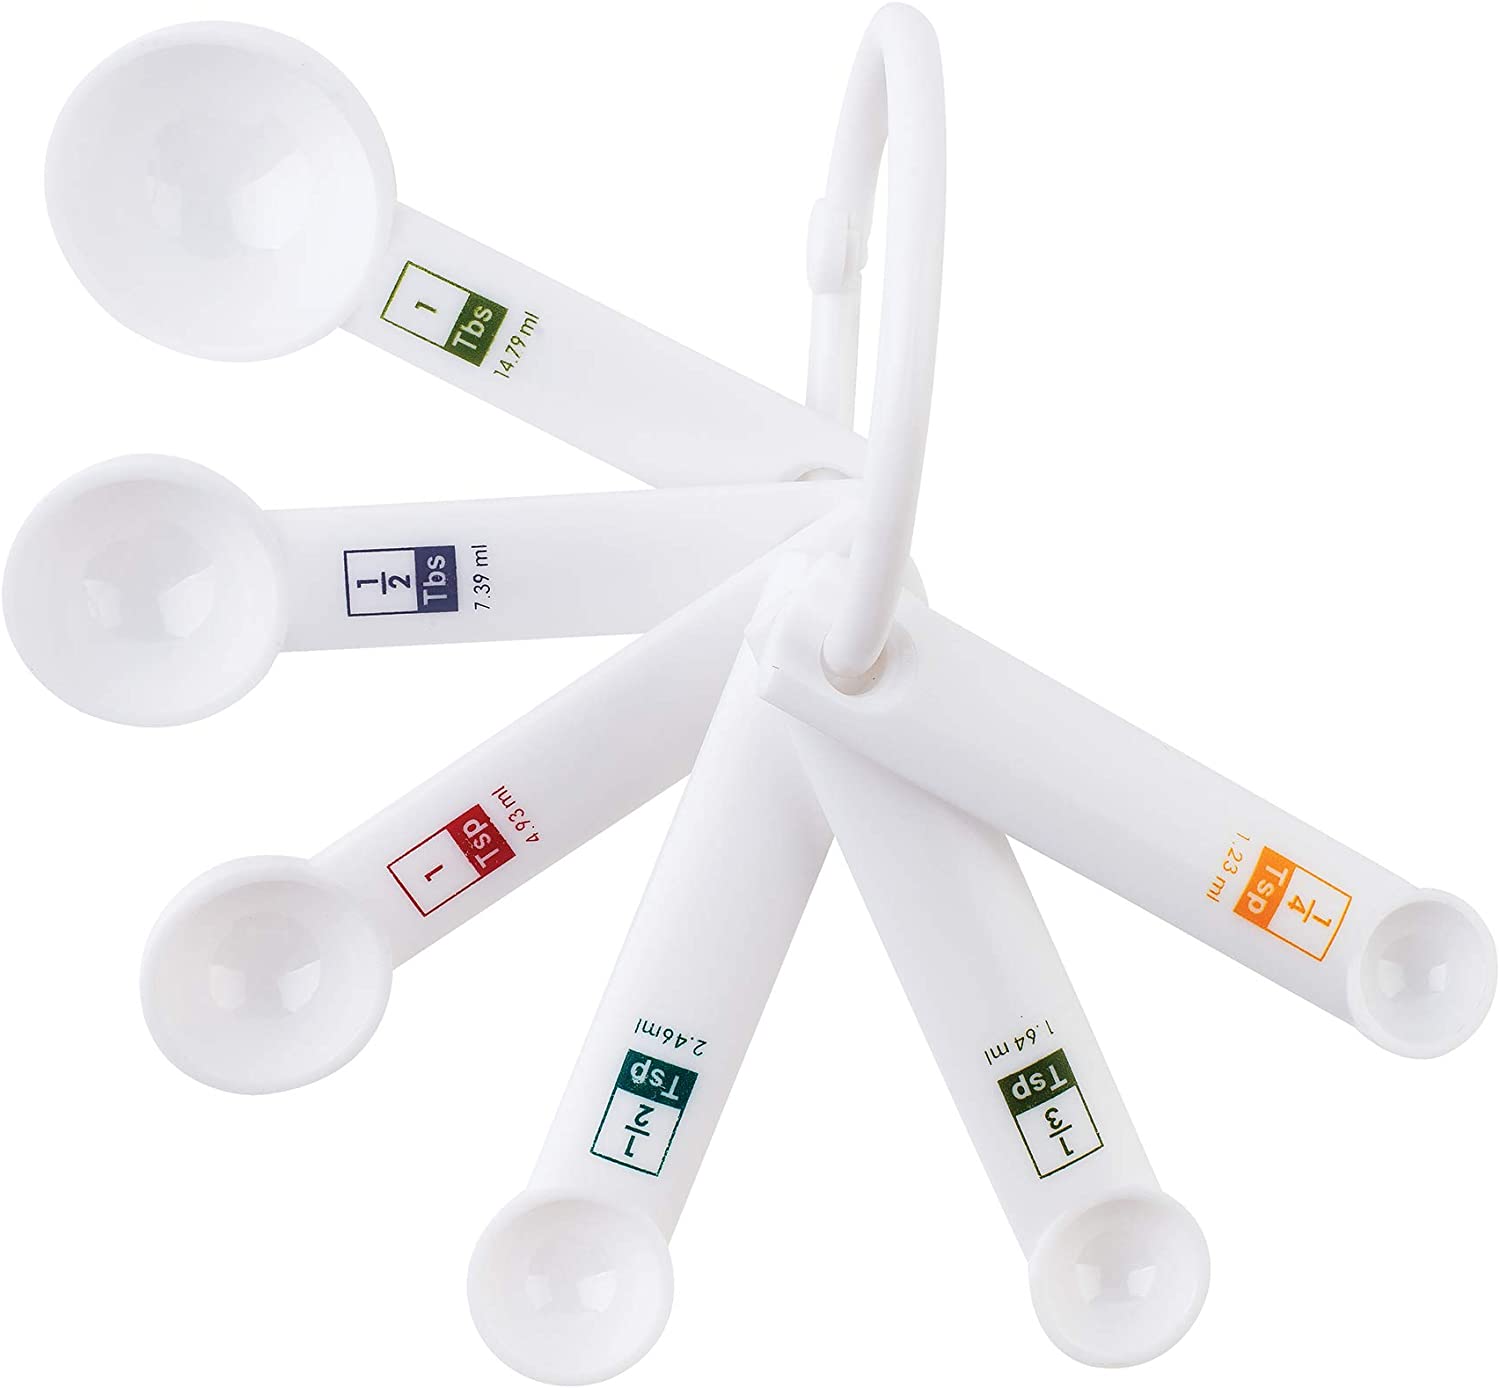 Measuring Spoons - Dedicated for paint projects. 